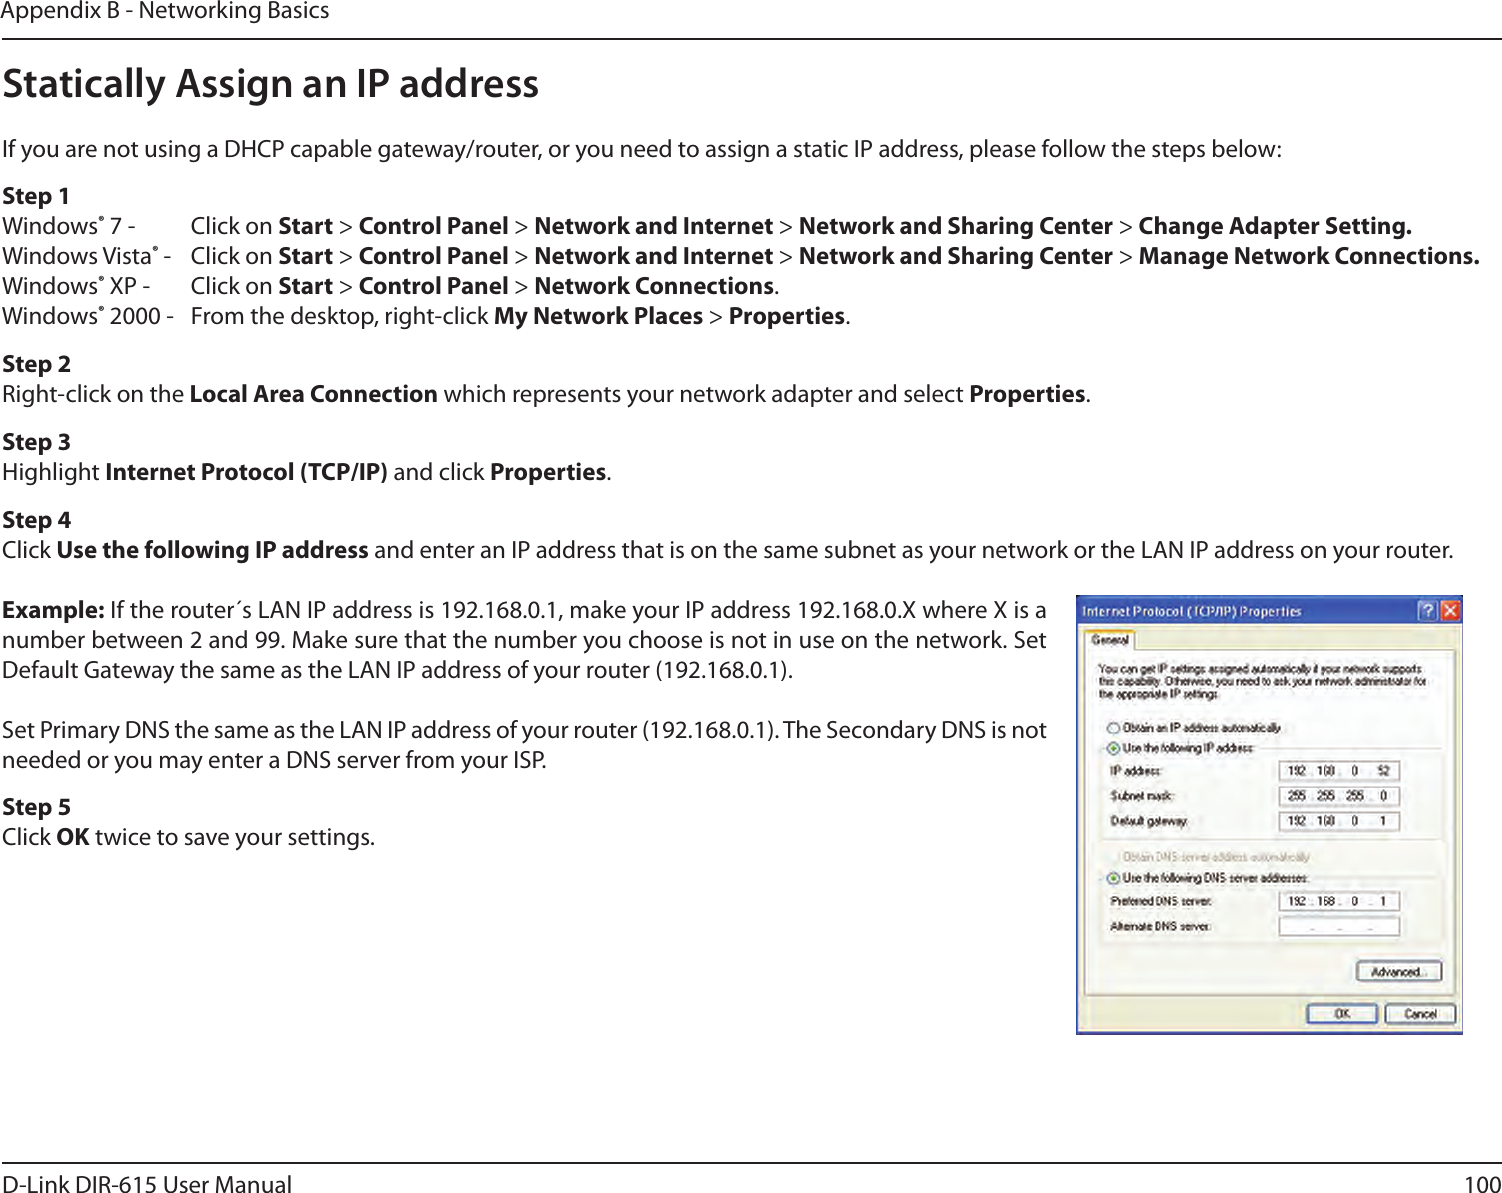 100D-Link DIR-615 User ManualAppendix B - Networking BasicsStatically Assign an IP addressIf you are not using a DHCP capable gateway/router, or you need to assign a static IP address, please follow the steps below:Step 1Windows® 7 -  Click on Start &gt; Control Panel &gt; Network and Internet &gt; Network and Sharing Center &gt; Change Adapter Setting. Windows Vista® -  Click on Start &gt; Control Panel &gt; Network and Internet &gt; Network and Sharing Center &gt; Manage Network Connections.Windows® XP -  Click on Start &gt; Control Panel &gt; Network Connections.Windows® 2000 -  From the desktop, right-click My Network Places &gt; Properties.Step 2Right-click on the Local Area Connection which represents your network adapter and select Properties.Step 3Highlight Internet Protocol (TCP/IP) and click Properties.Step 4Click Use the following IP address and enter an IP address that is on the same subnet as your network or the LAN IP address on your router.Example: If the router´s LAN IP address is 192.168.0.1, make your IP address 192.168.0.X where X is a number between 2 and 99. Make sure that the number you choose is not in use on the network. Set Default Gateway the same as the LAN IP address of your router (192.168.0.1). Set Primary DNS the same as the LAN IP address of your router (192.168.0.1). The Secondary DNS is not needed or you may enter a DNS server from your ISP.Step 5Click OK twice to save your settings.